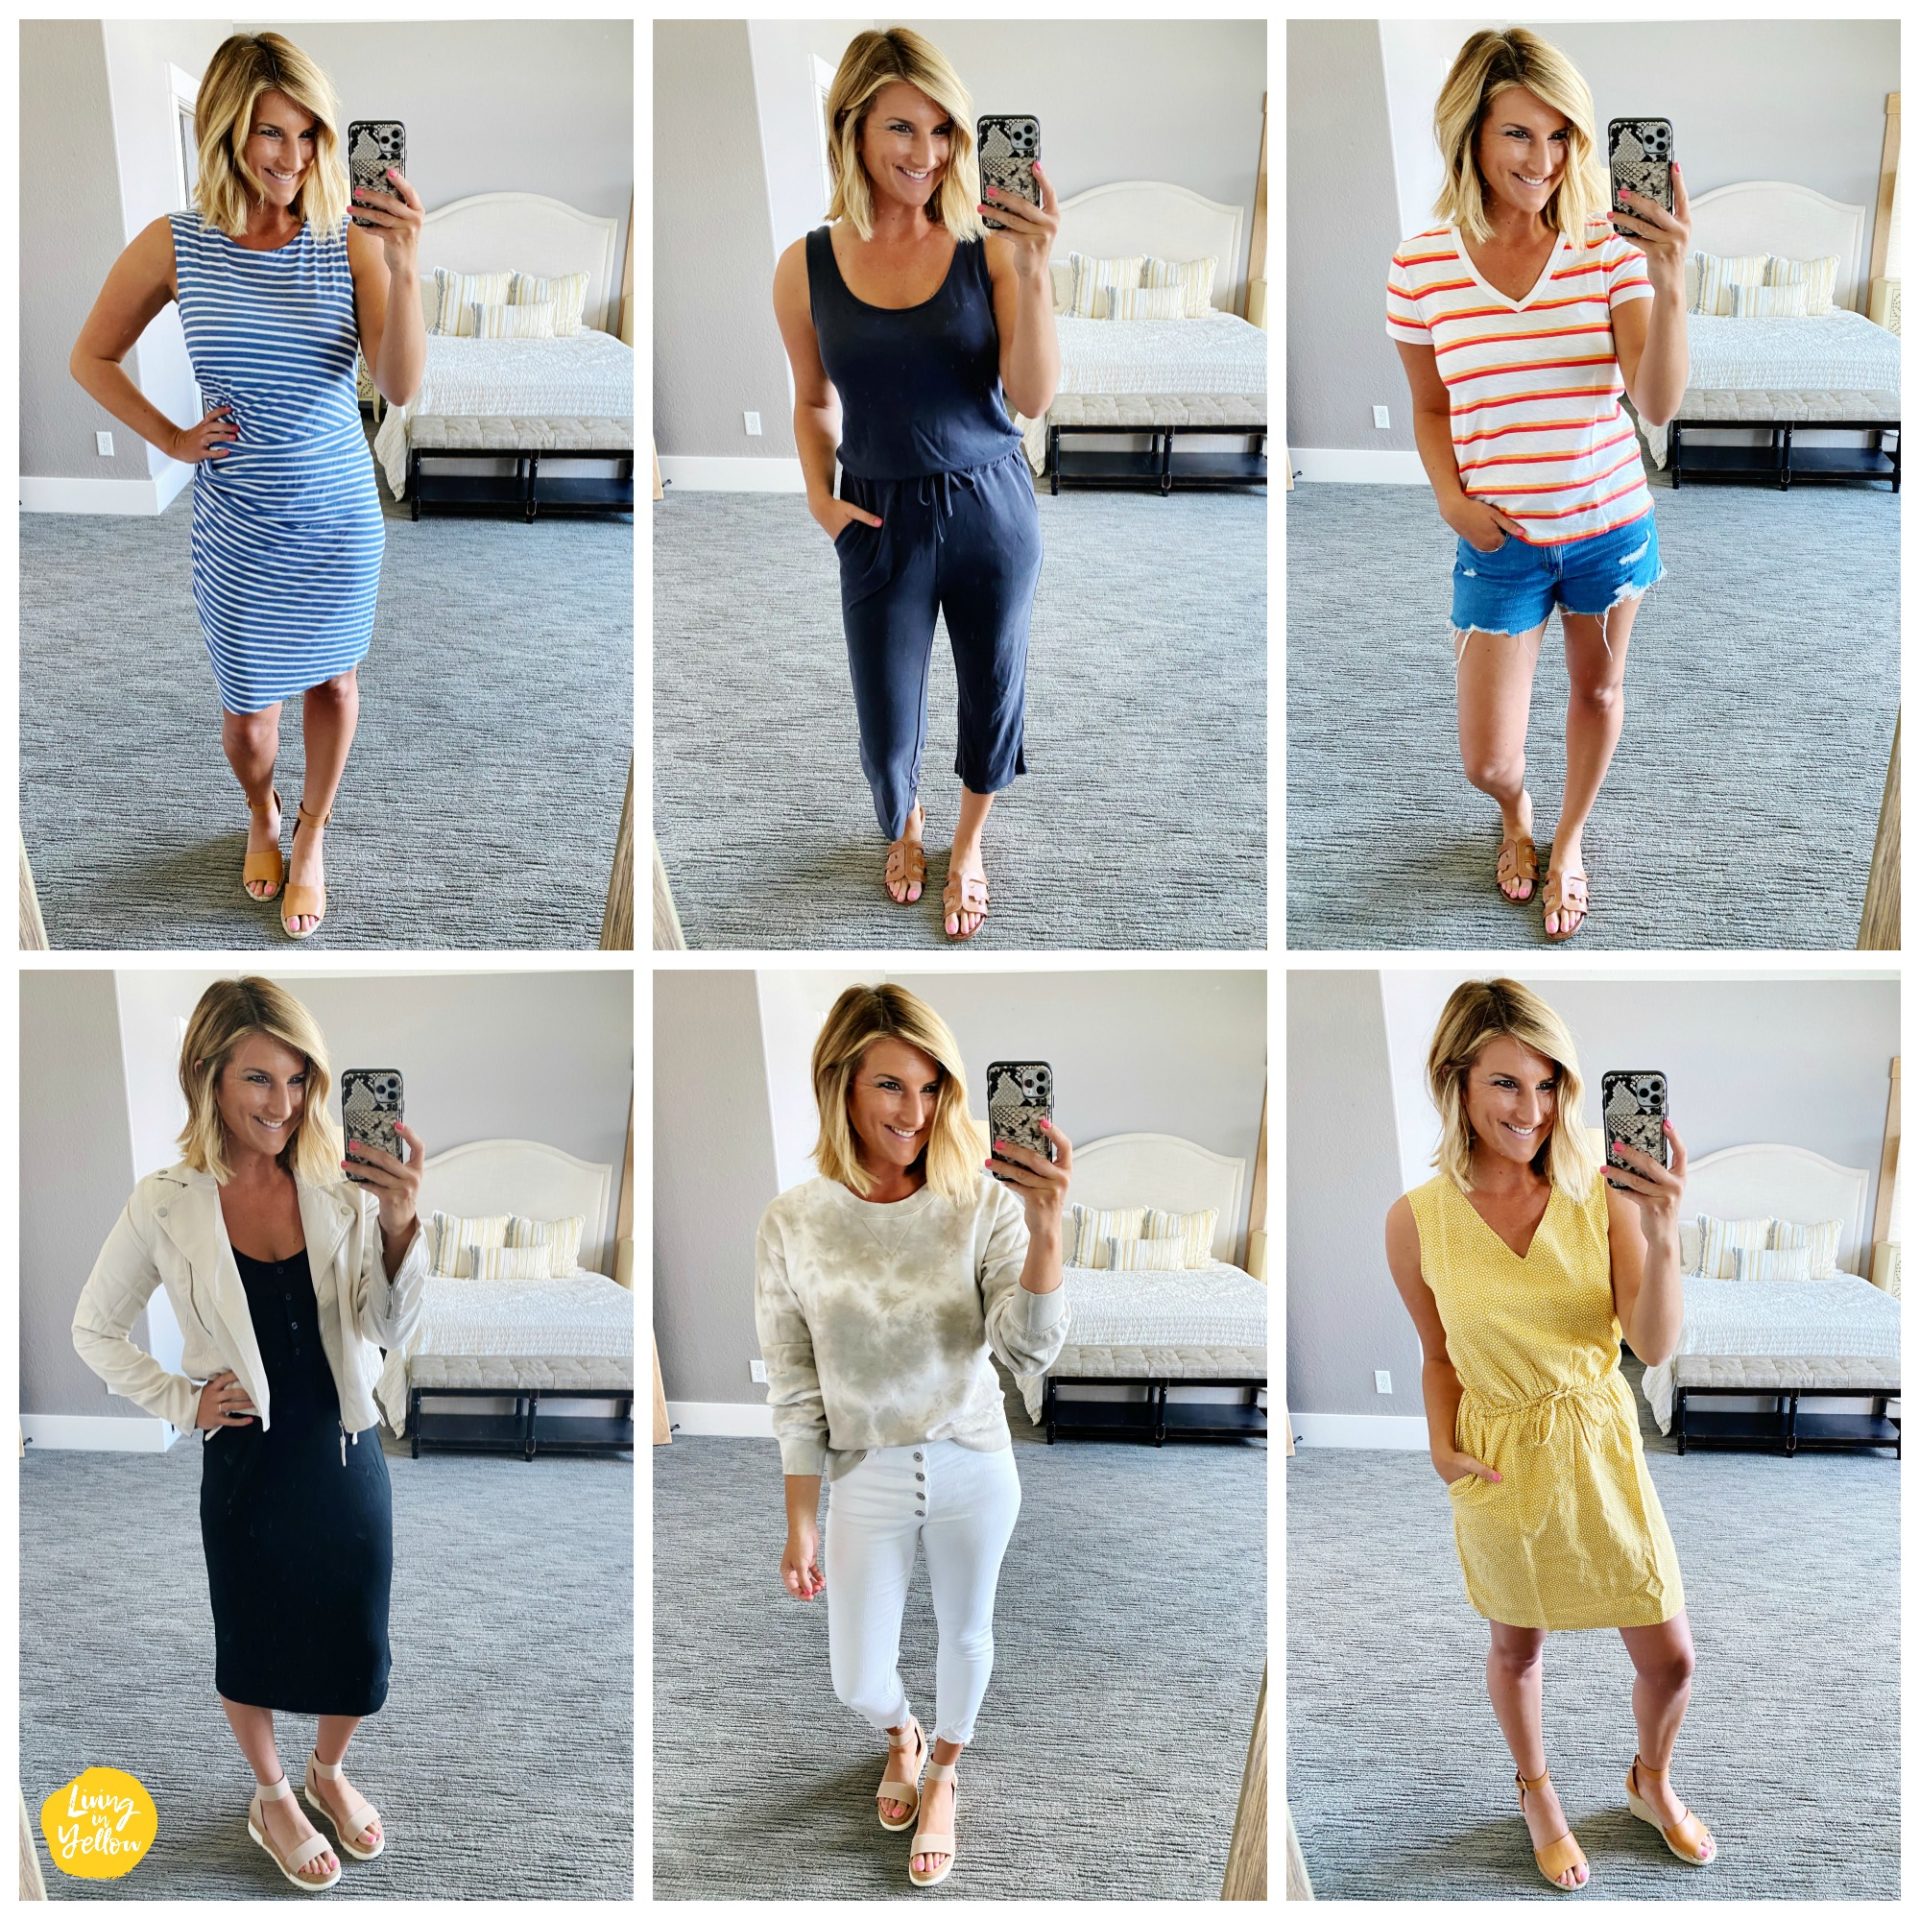 outfits to wear in summer